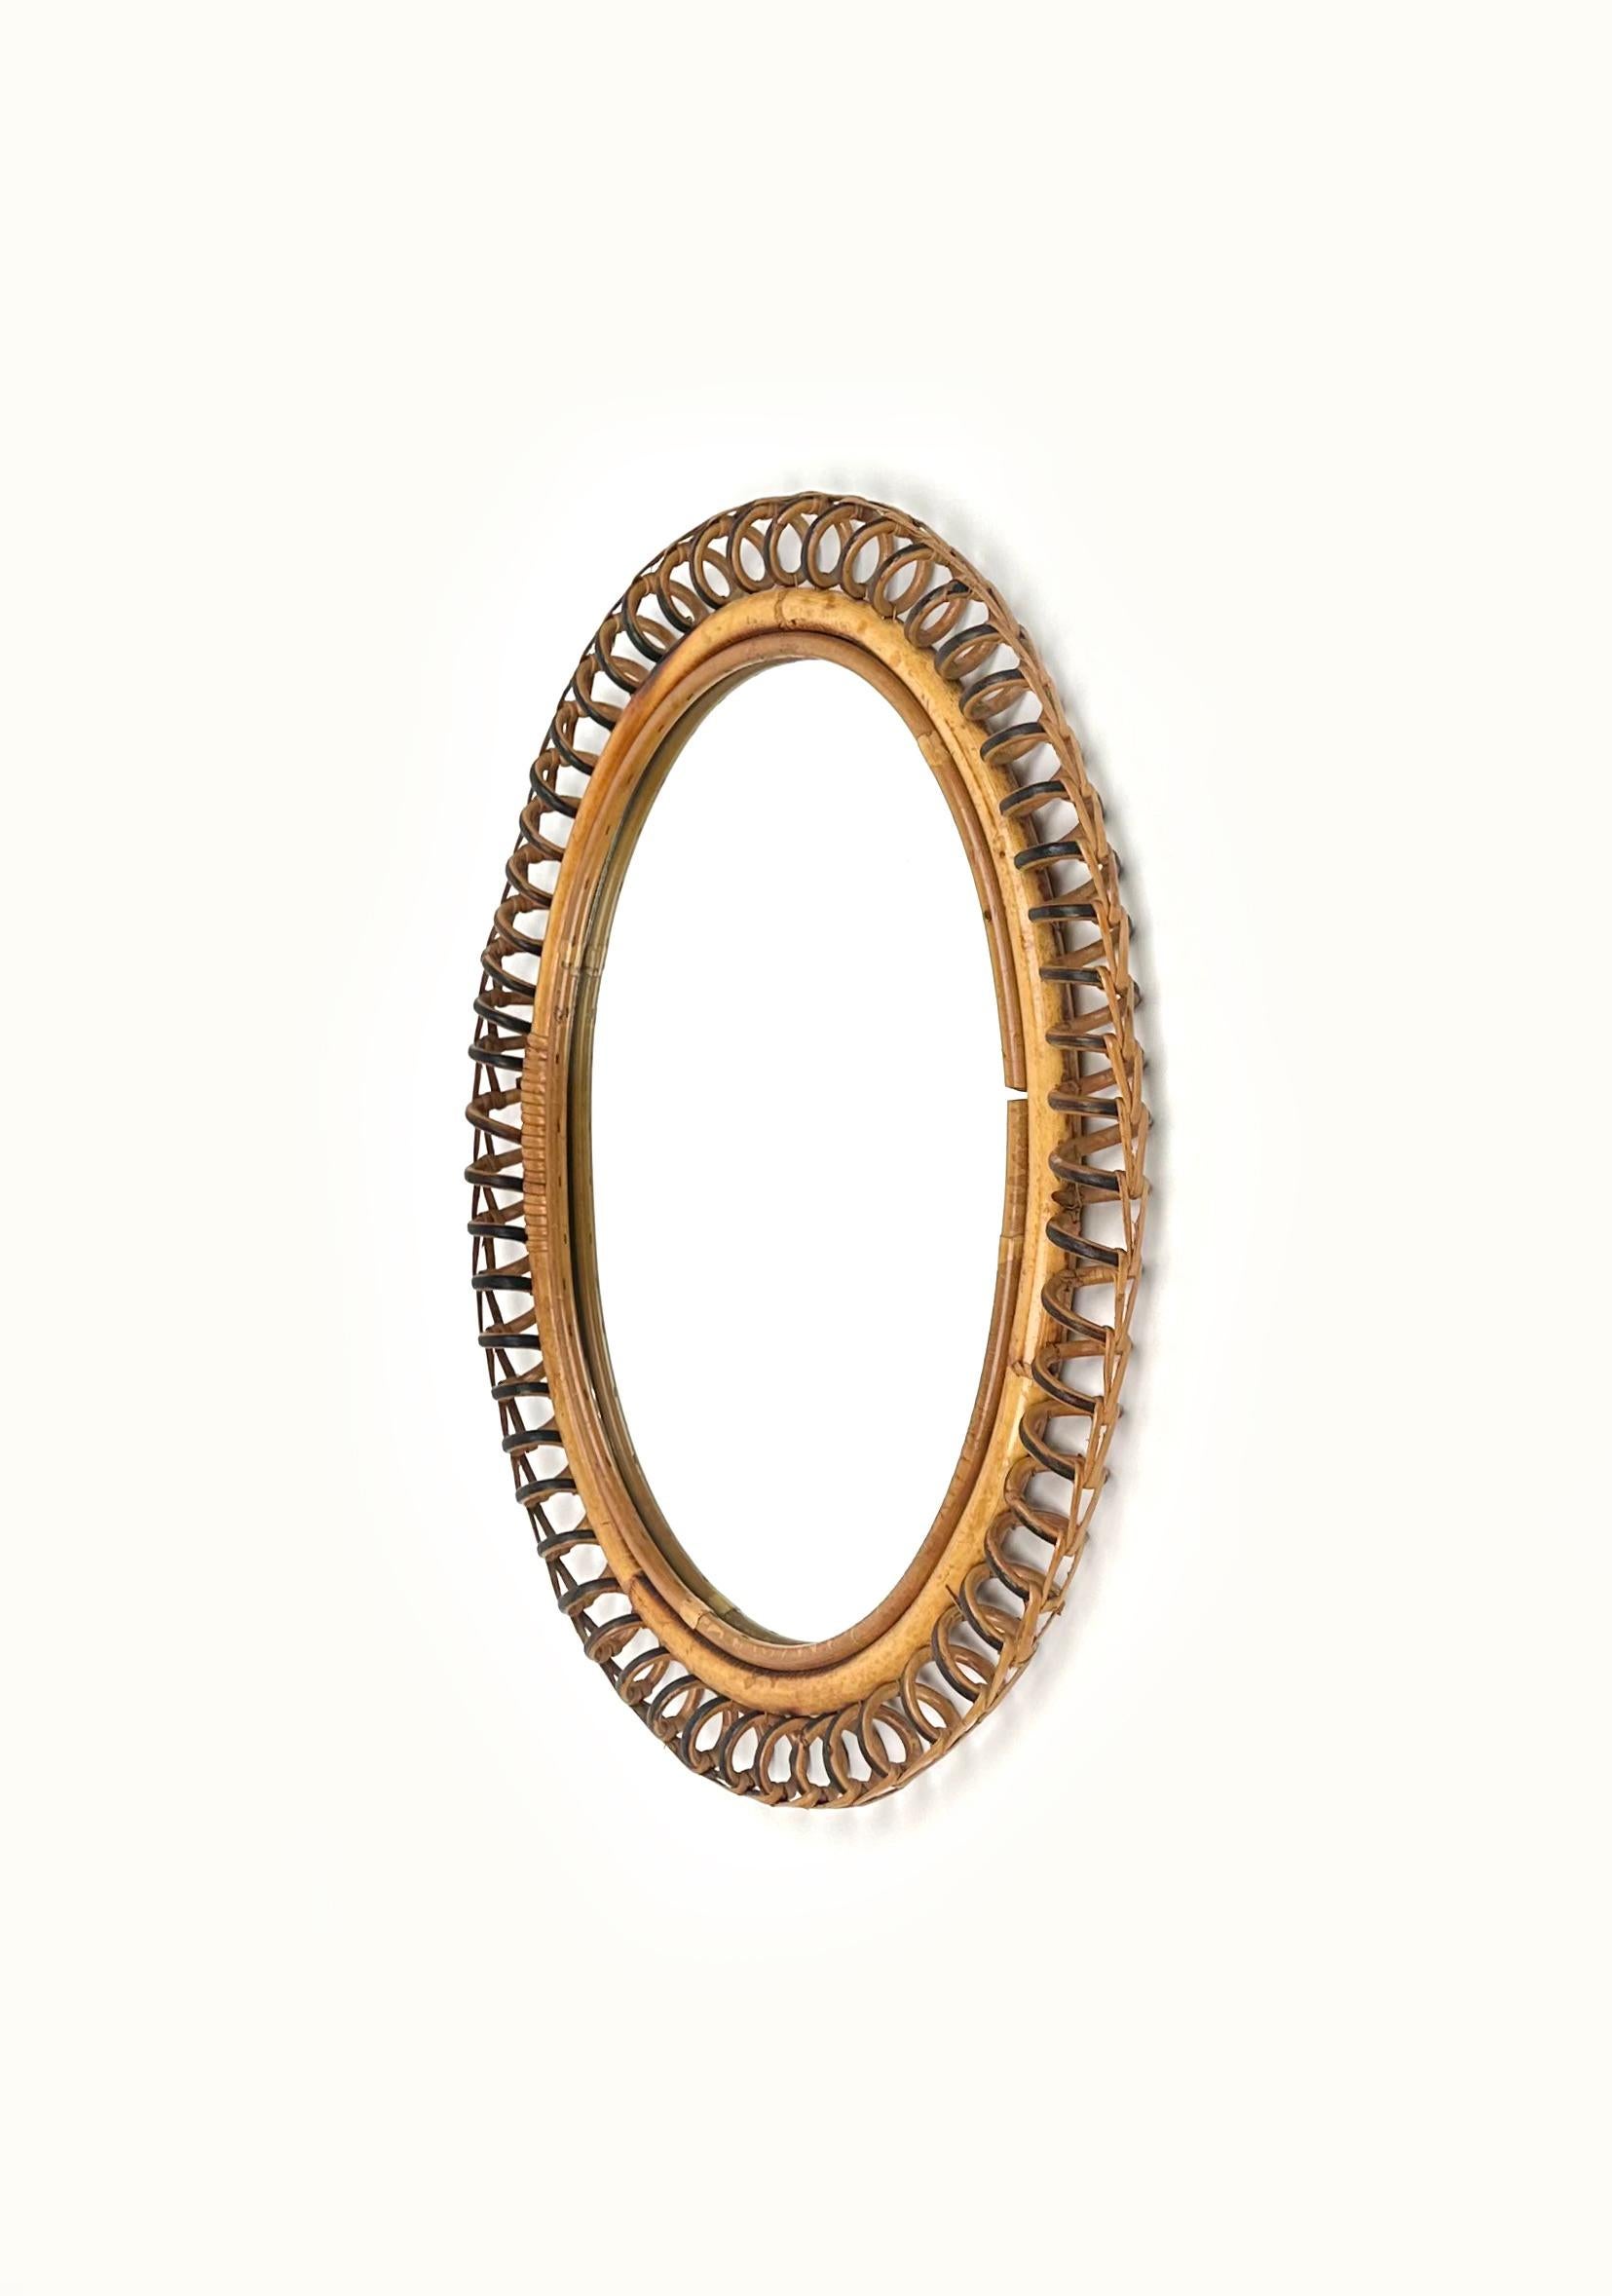 Italian Midcentury Rattan and Bamboo Oval Wall Mirror Franco Albini Style, Italy 1960s For Sale